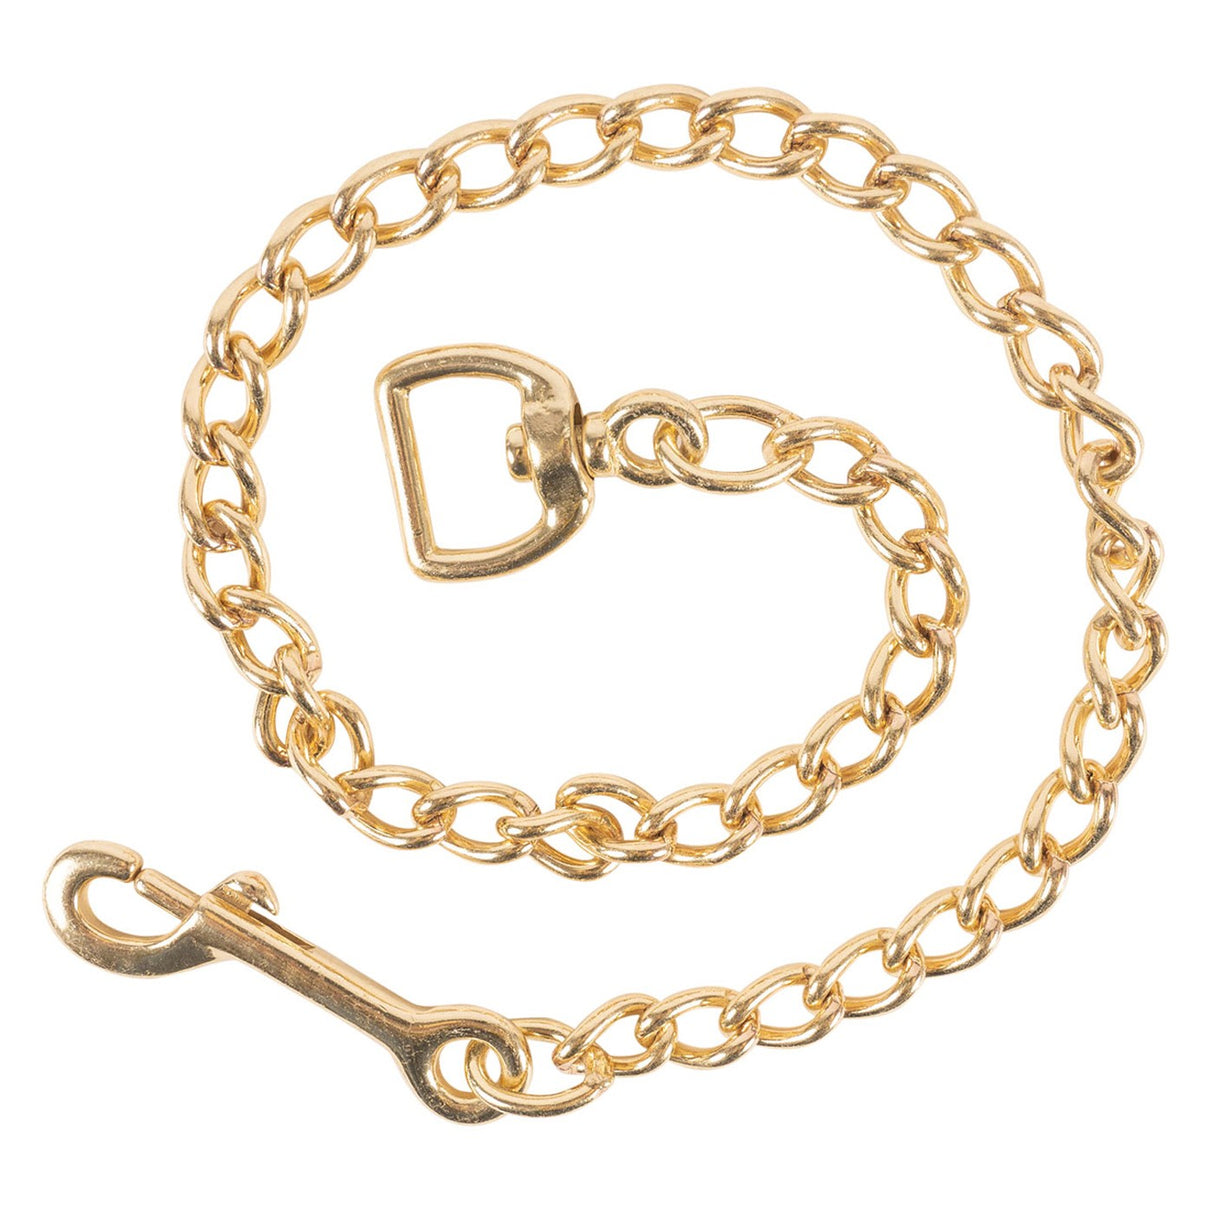 Shedrow Solid Brass Chain 30 In.